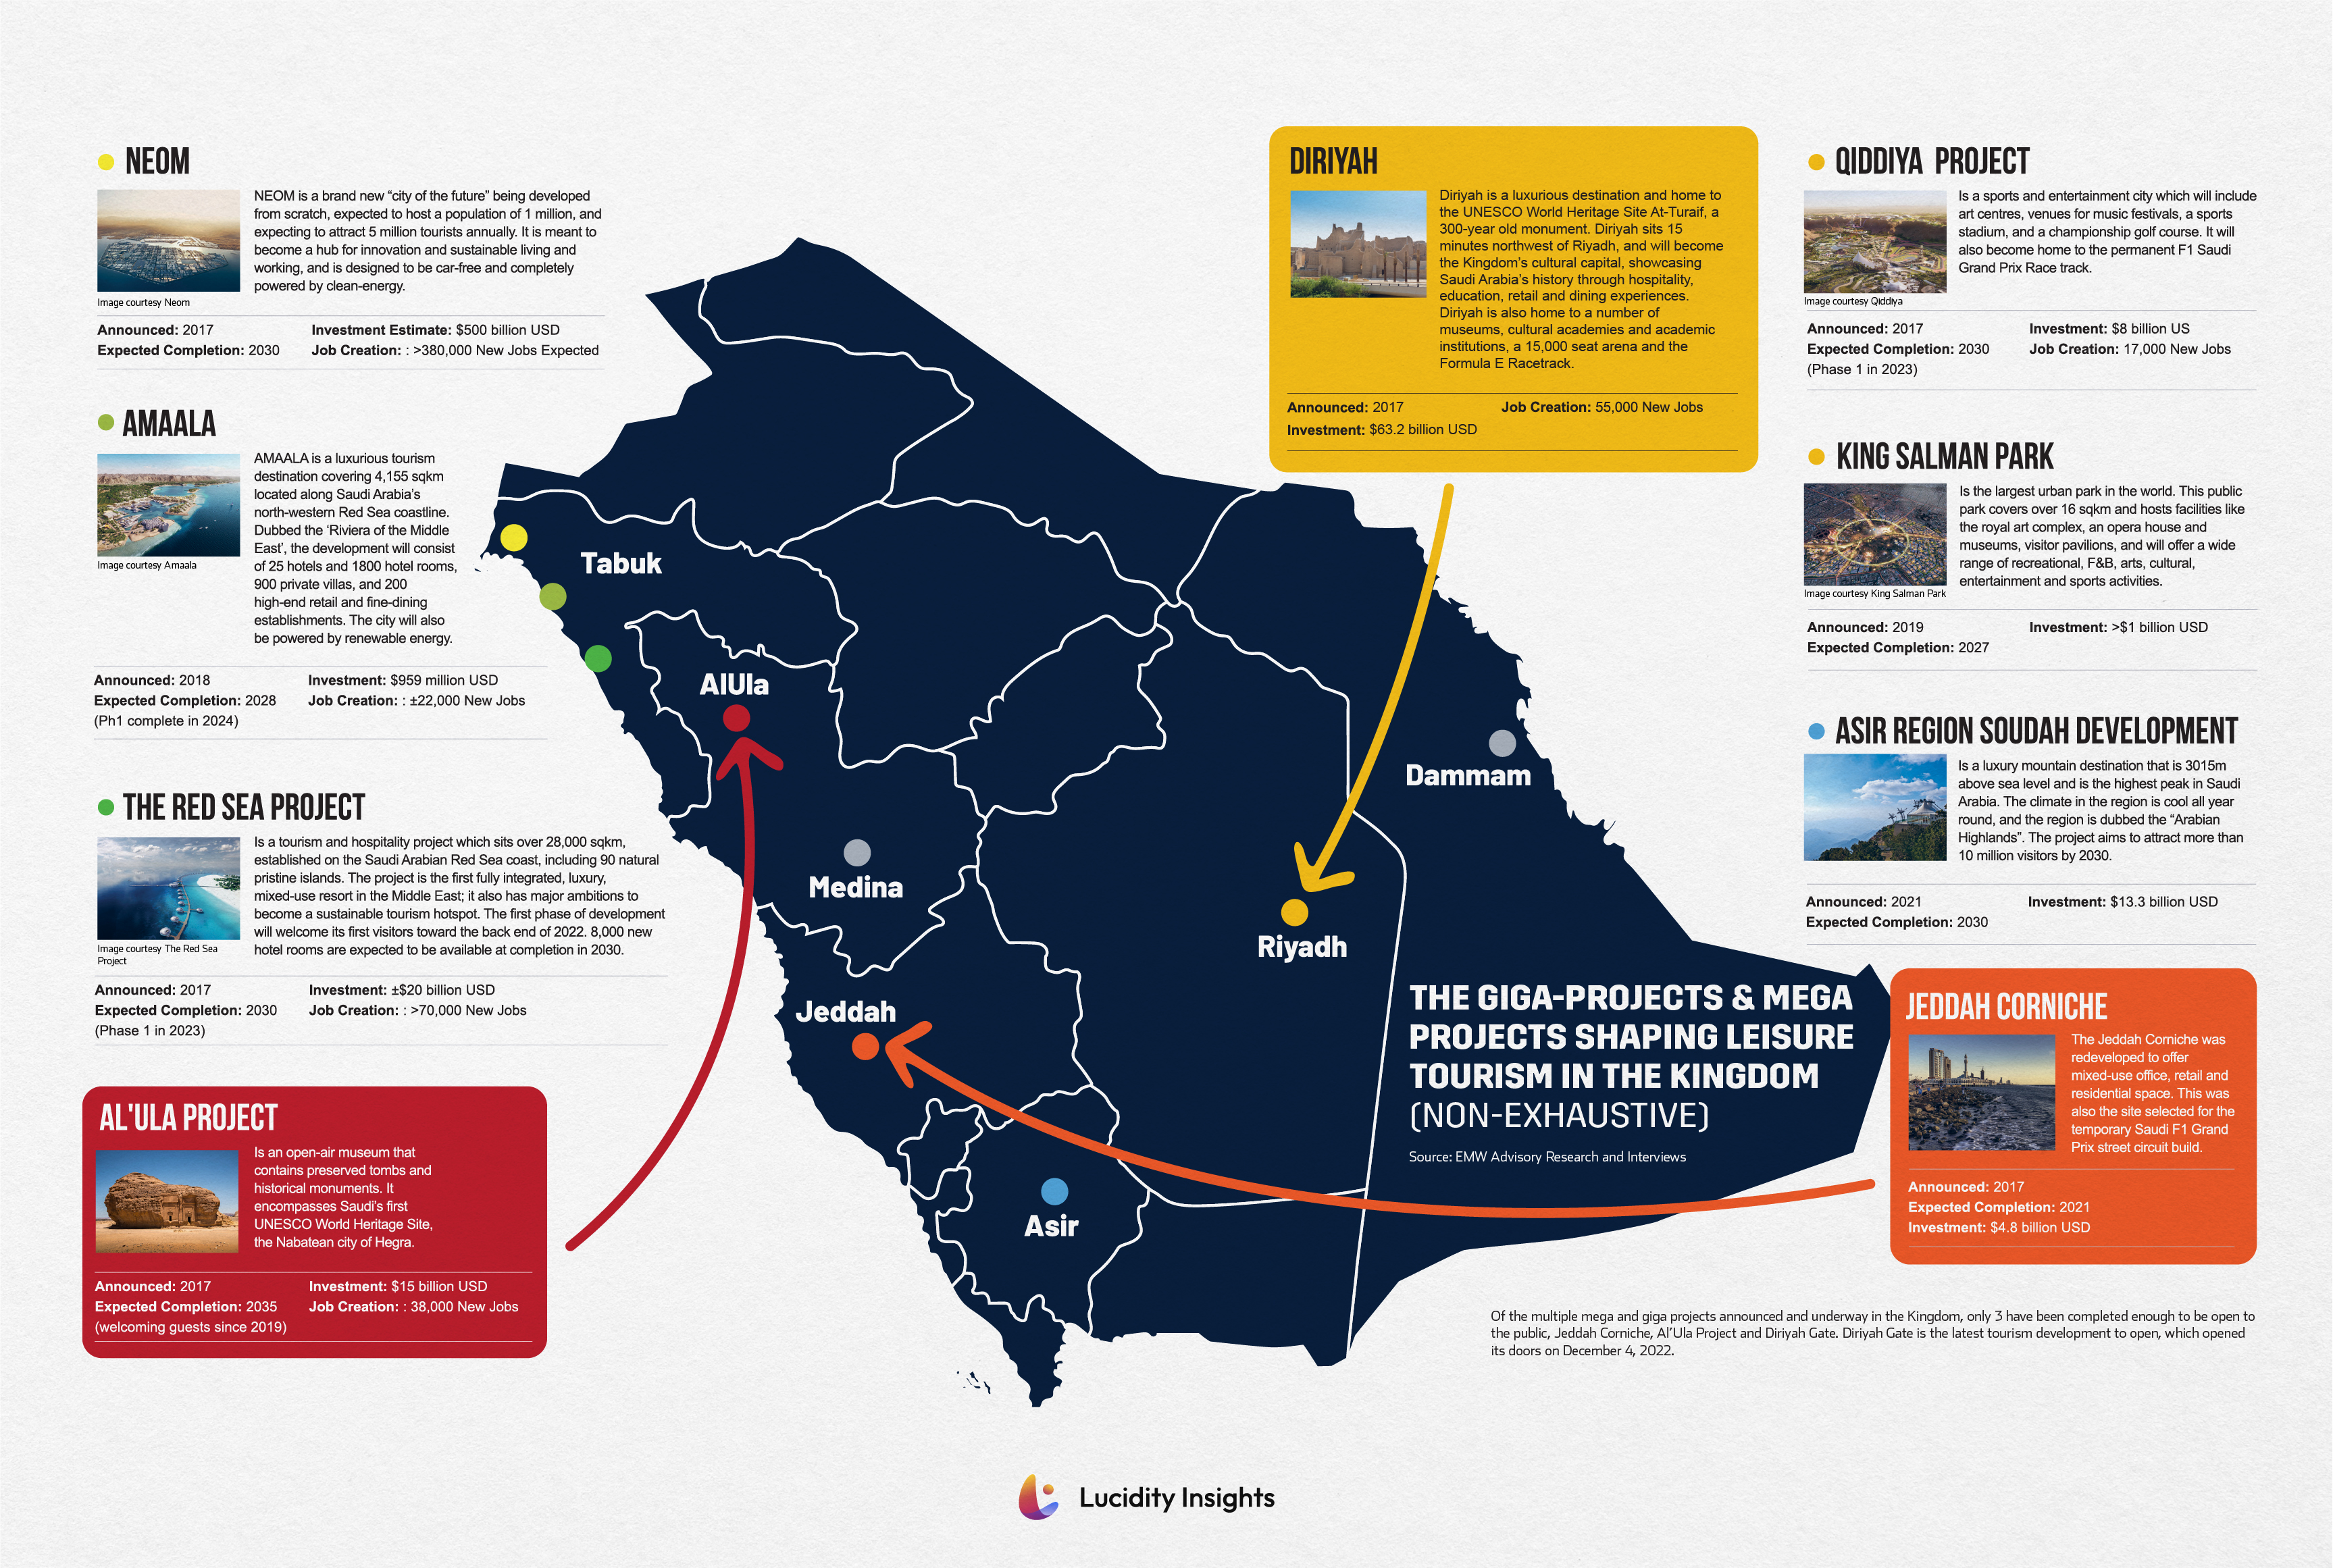 Infographic: The Giga-Projects & Mega Projects Shaping Leisure Tourism in the Kingdom